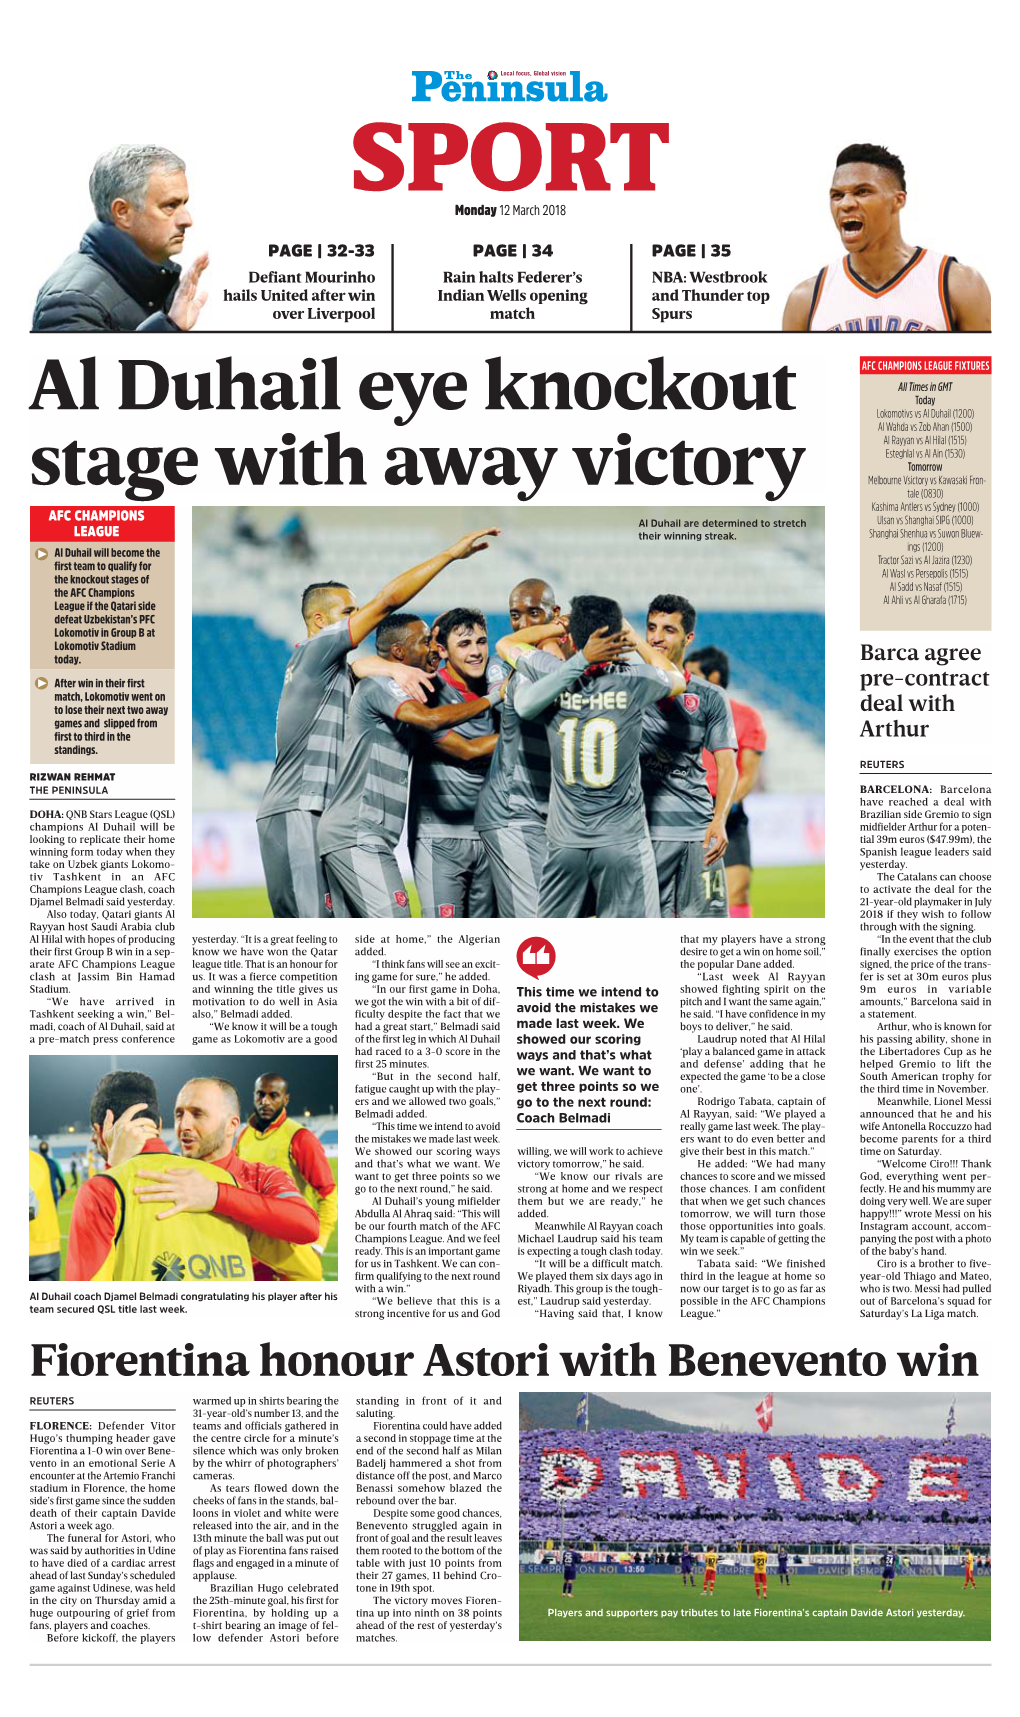 Al Duhail Eye Knockout Stage with Away Victory